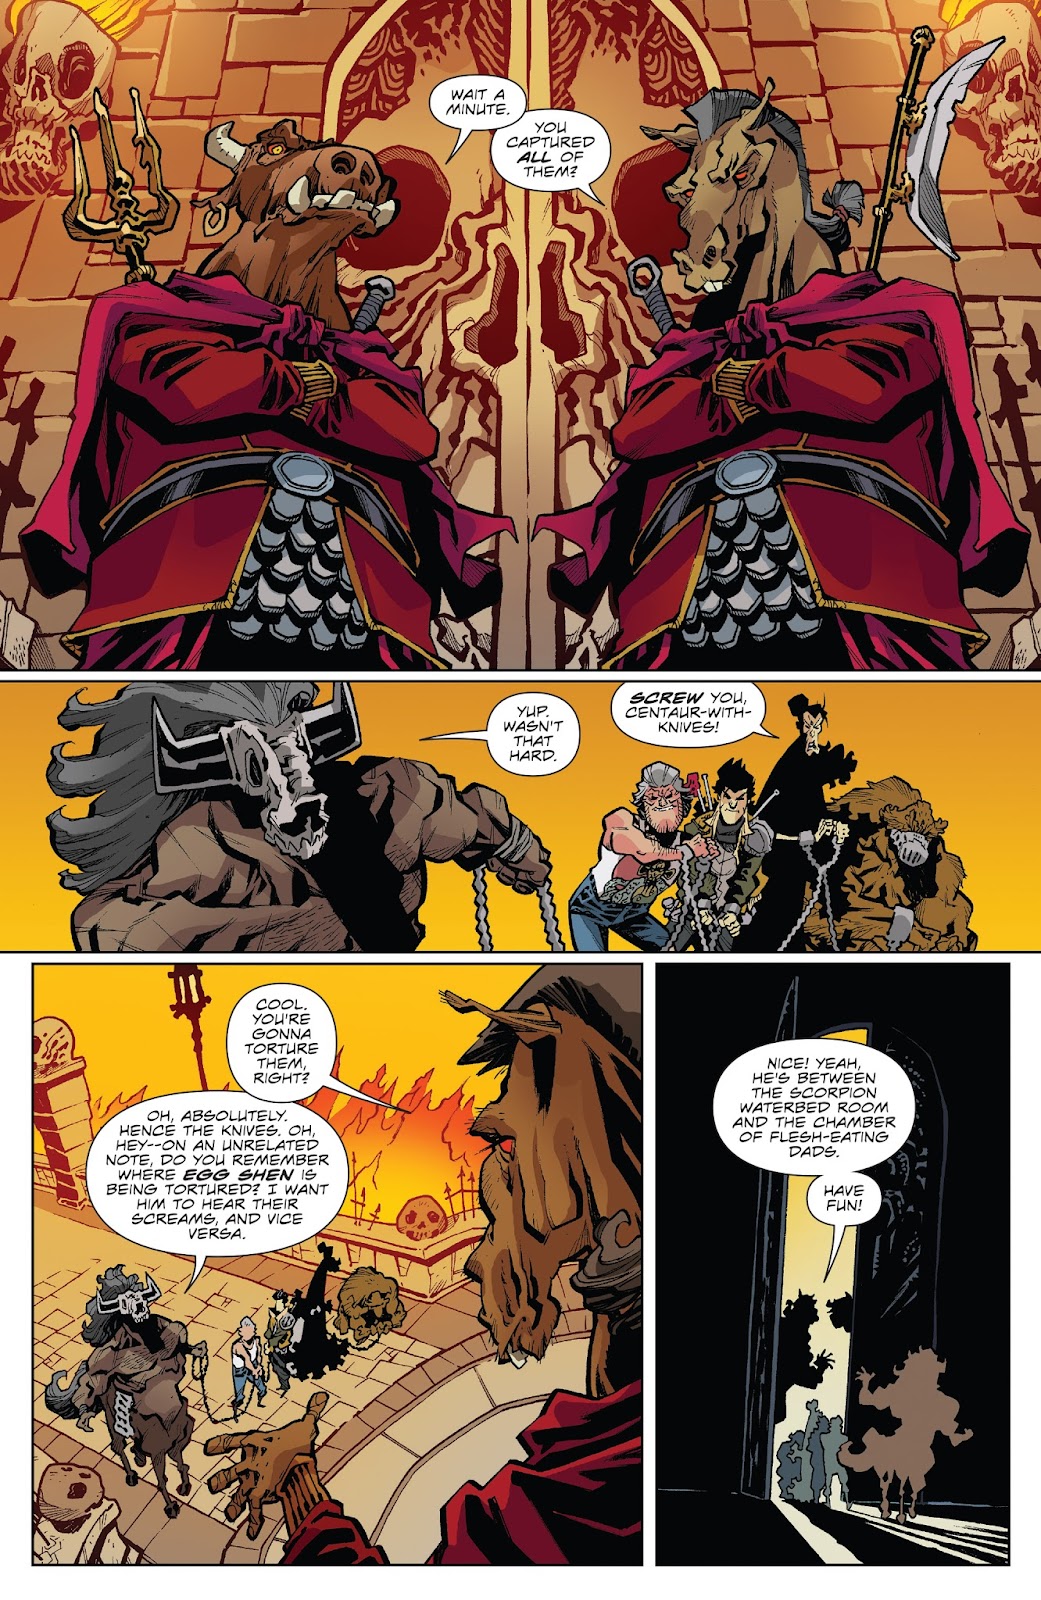 Big Trouble in Little China: Old Man Jack issue 7 - Page 3